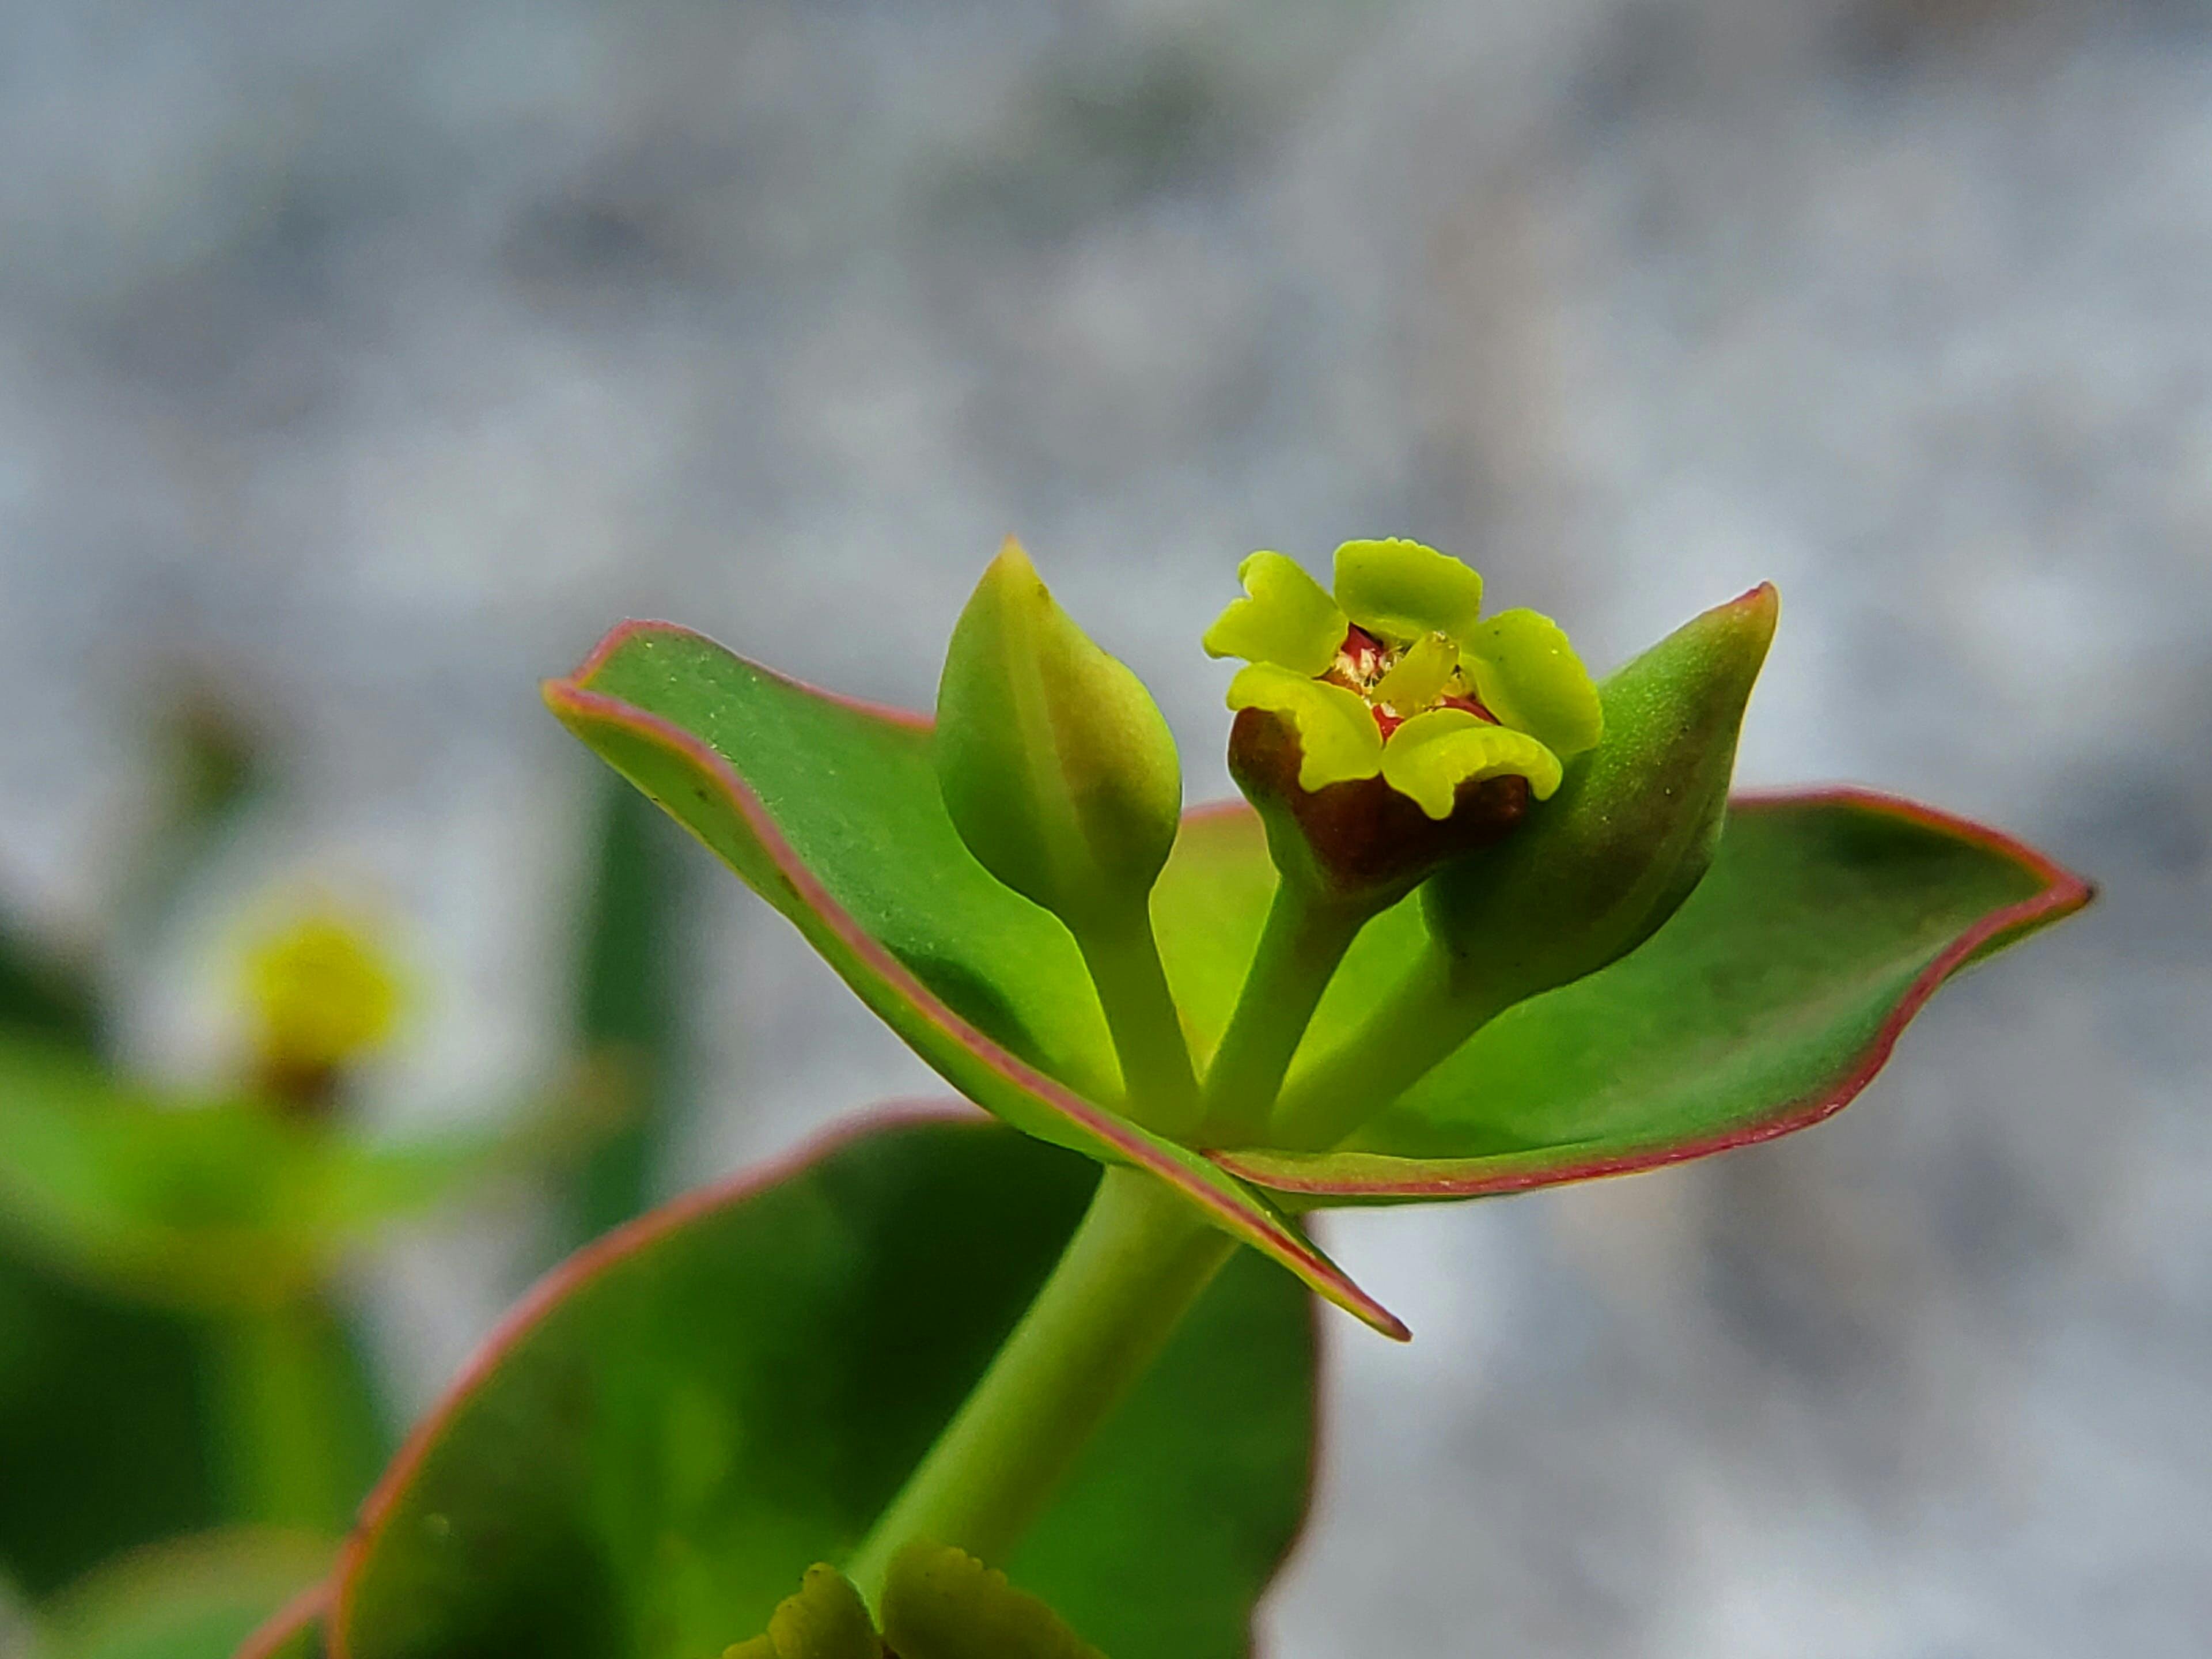 Female flower of the Scrub Spurge (Euphorbia rosescens), a state-listed endemic species that the Plant Ecology has monitored for over two decades. Photo Credit: Christine Sit